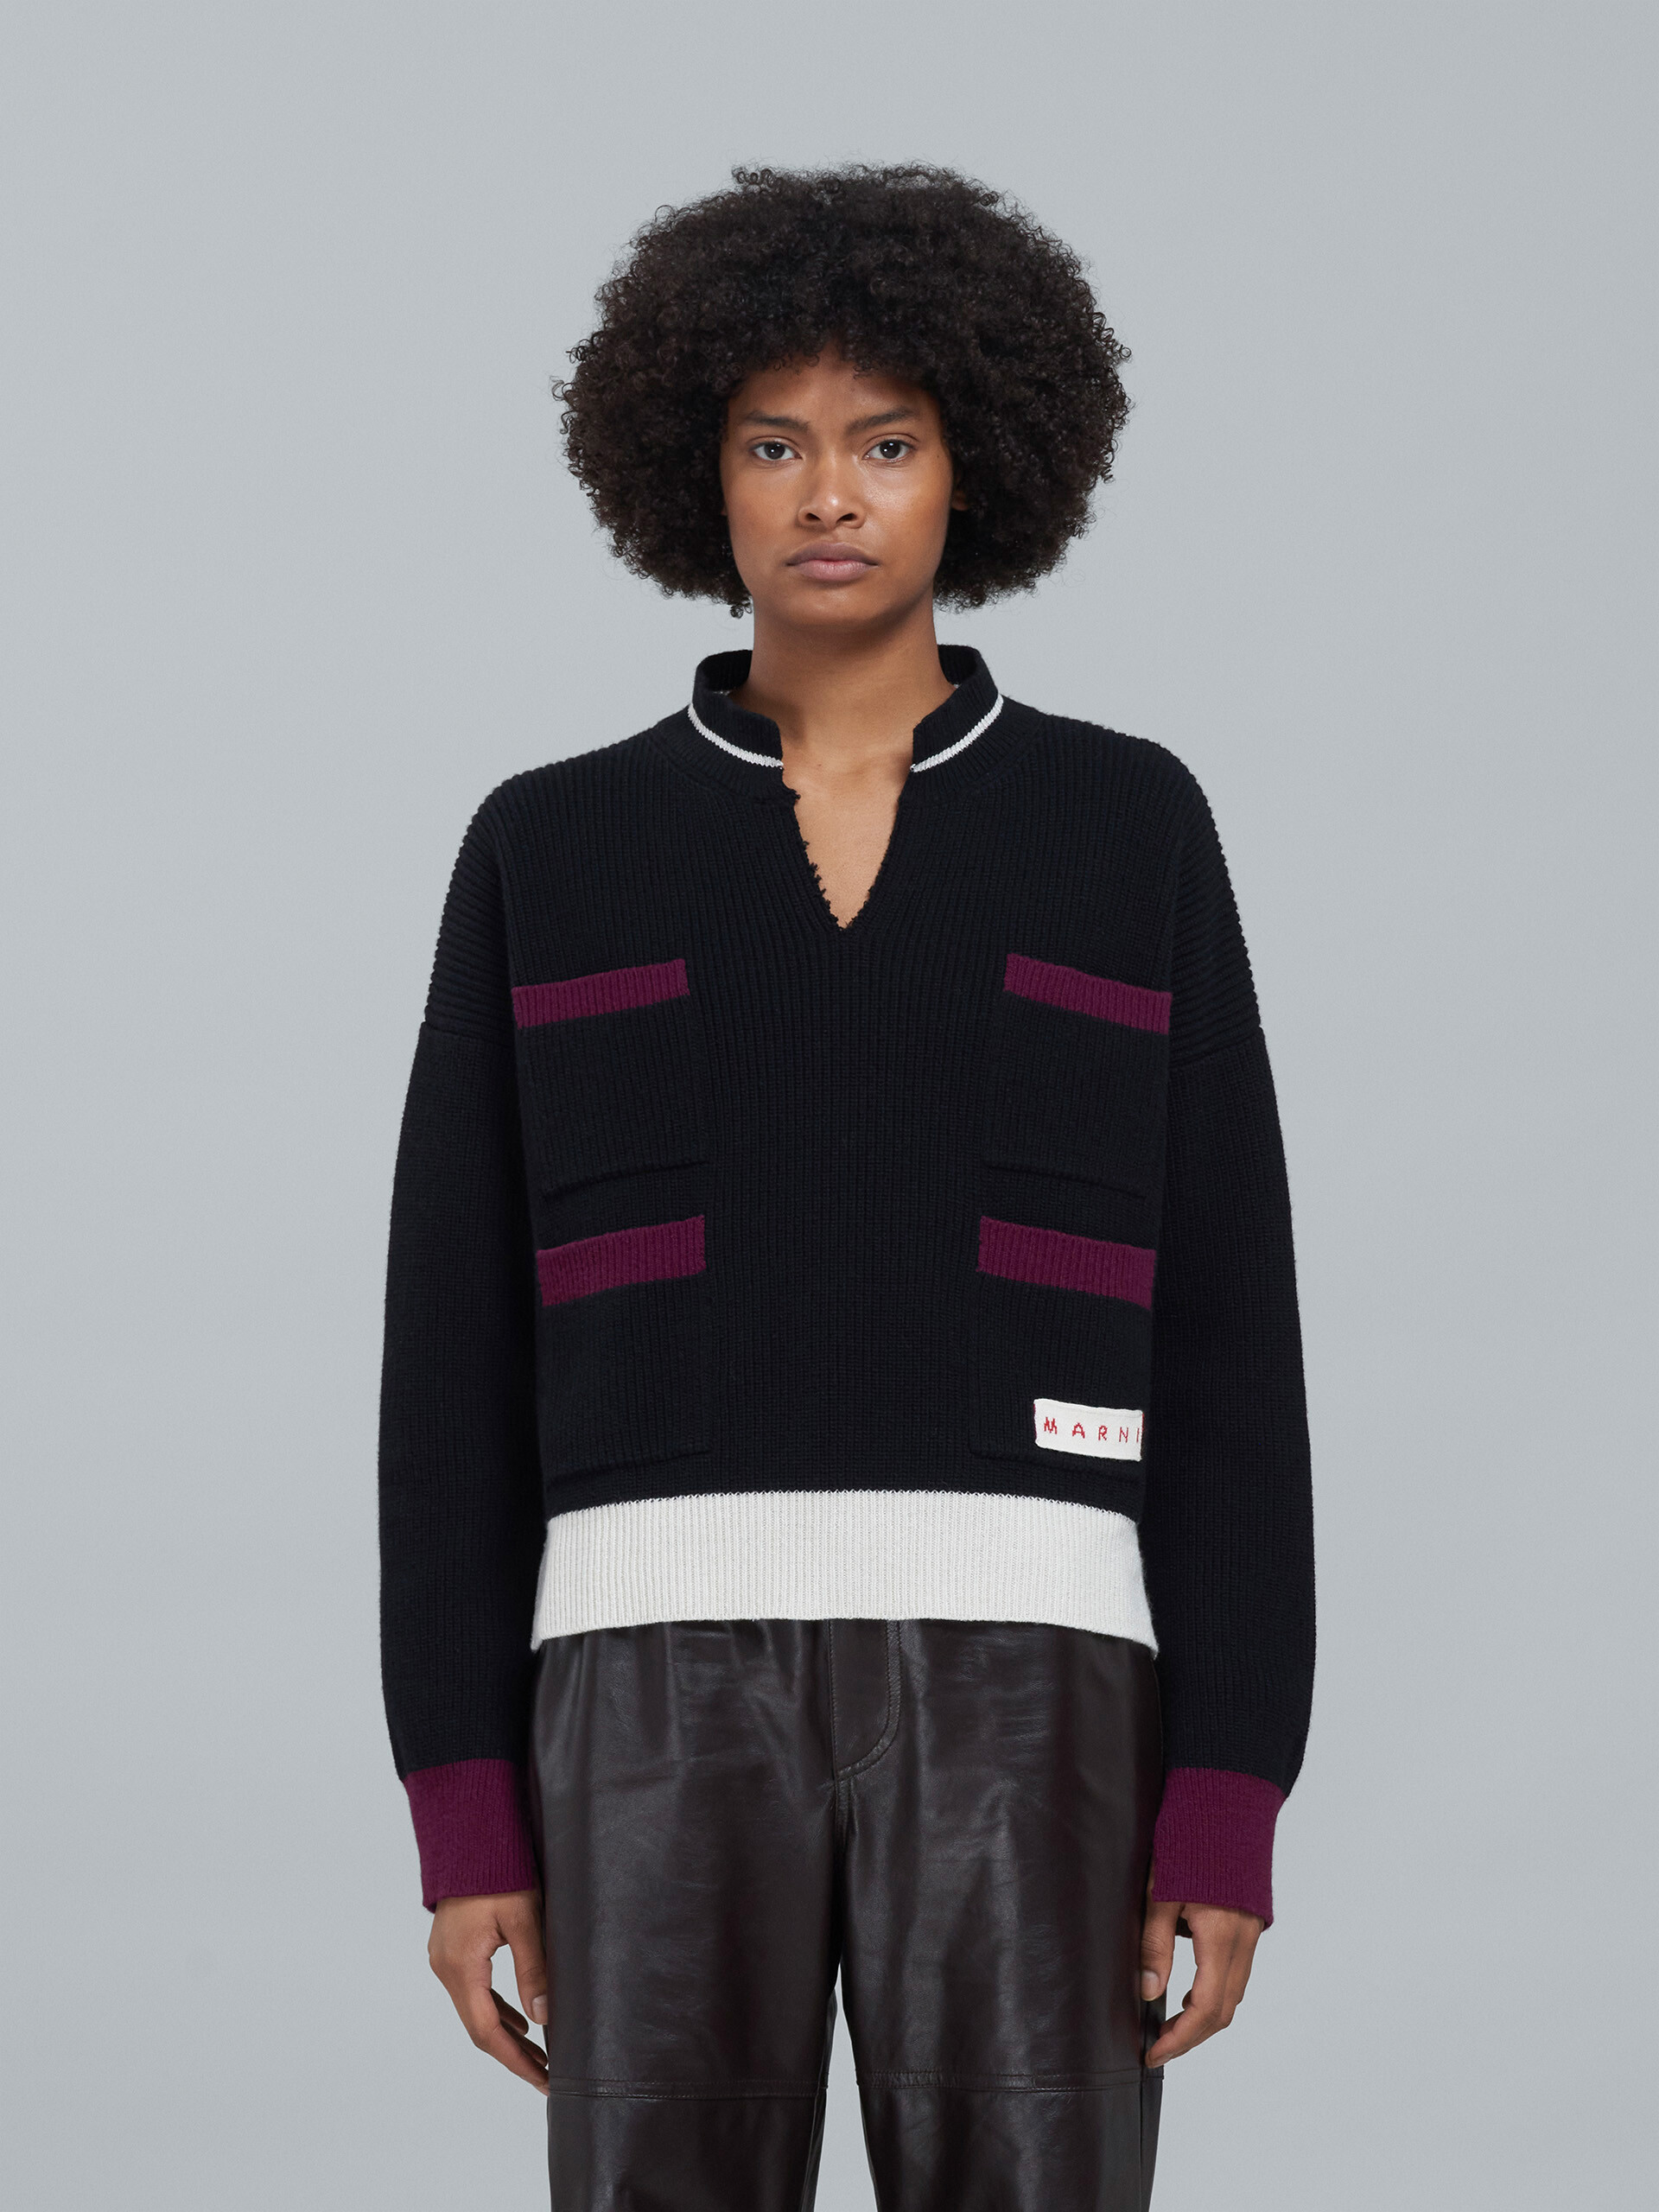 Shetland wool and cotton cropped crewneck sweater - Pullovers - Image 2